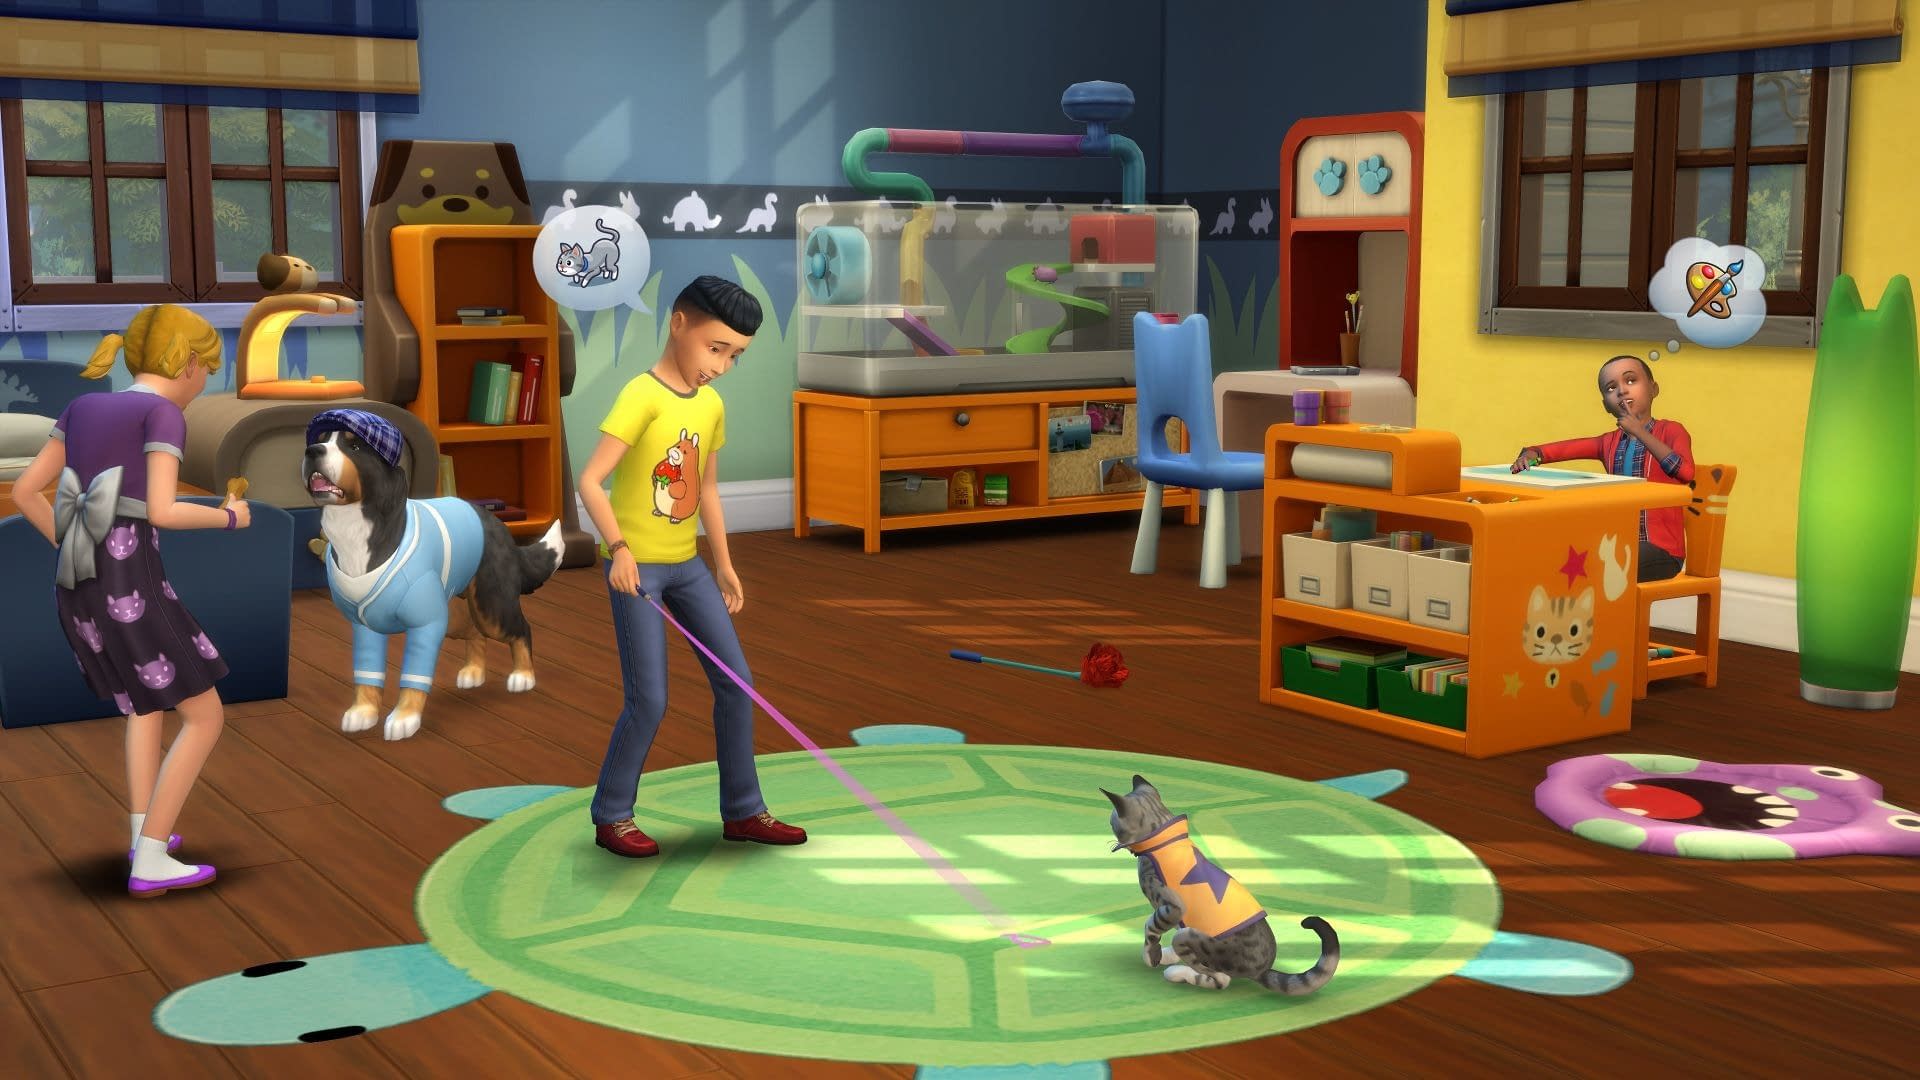 The Sims 4 Dlc is Free at My First Pet Stuff Steam!